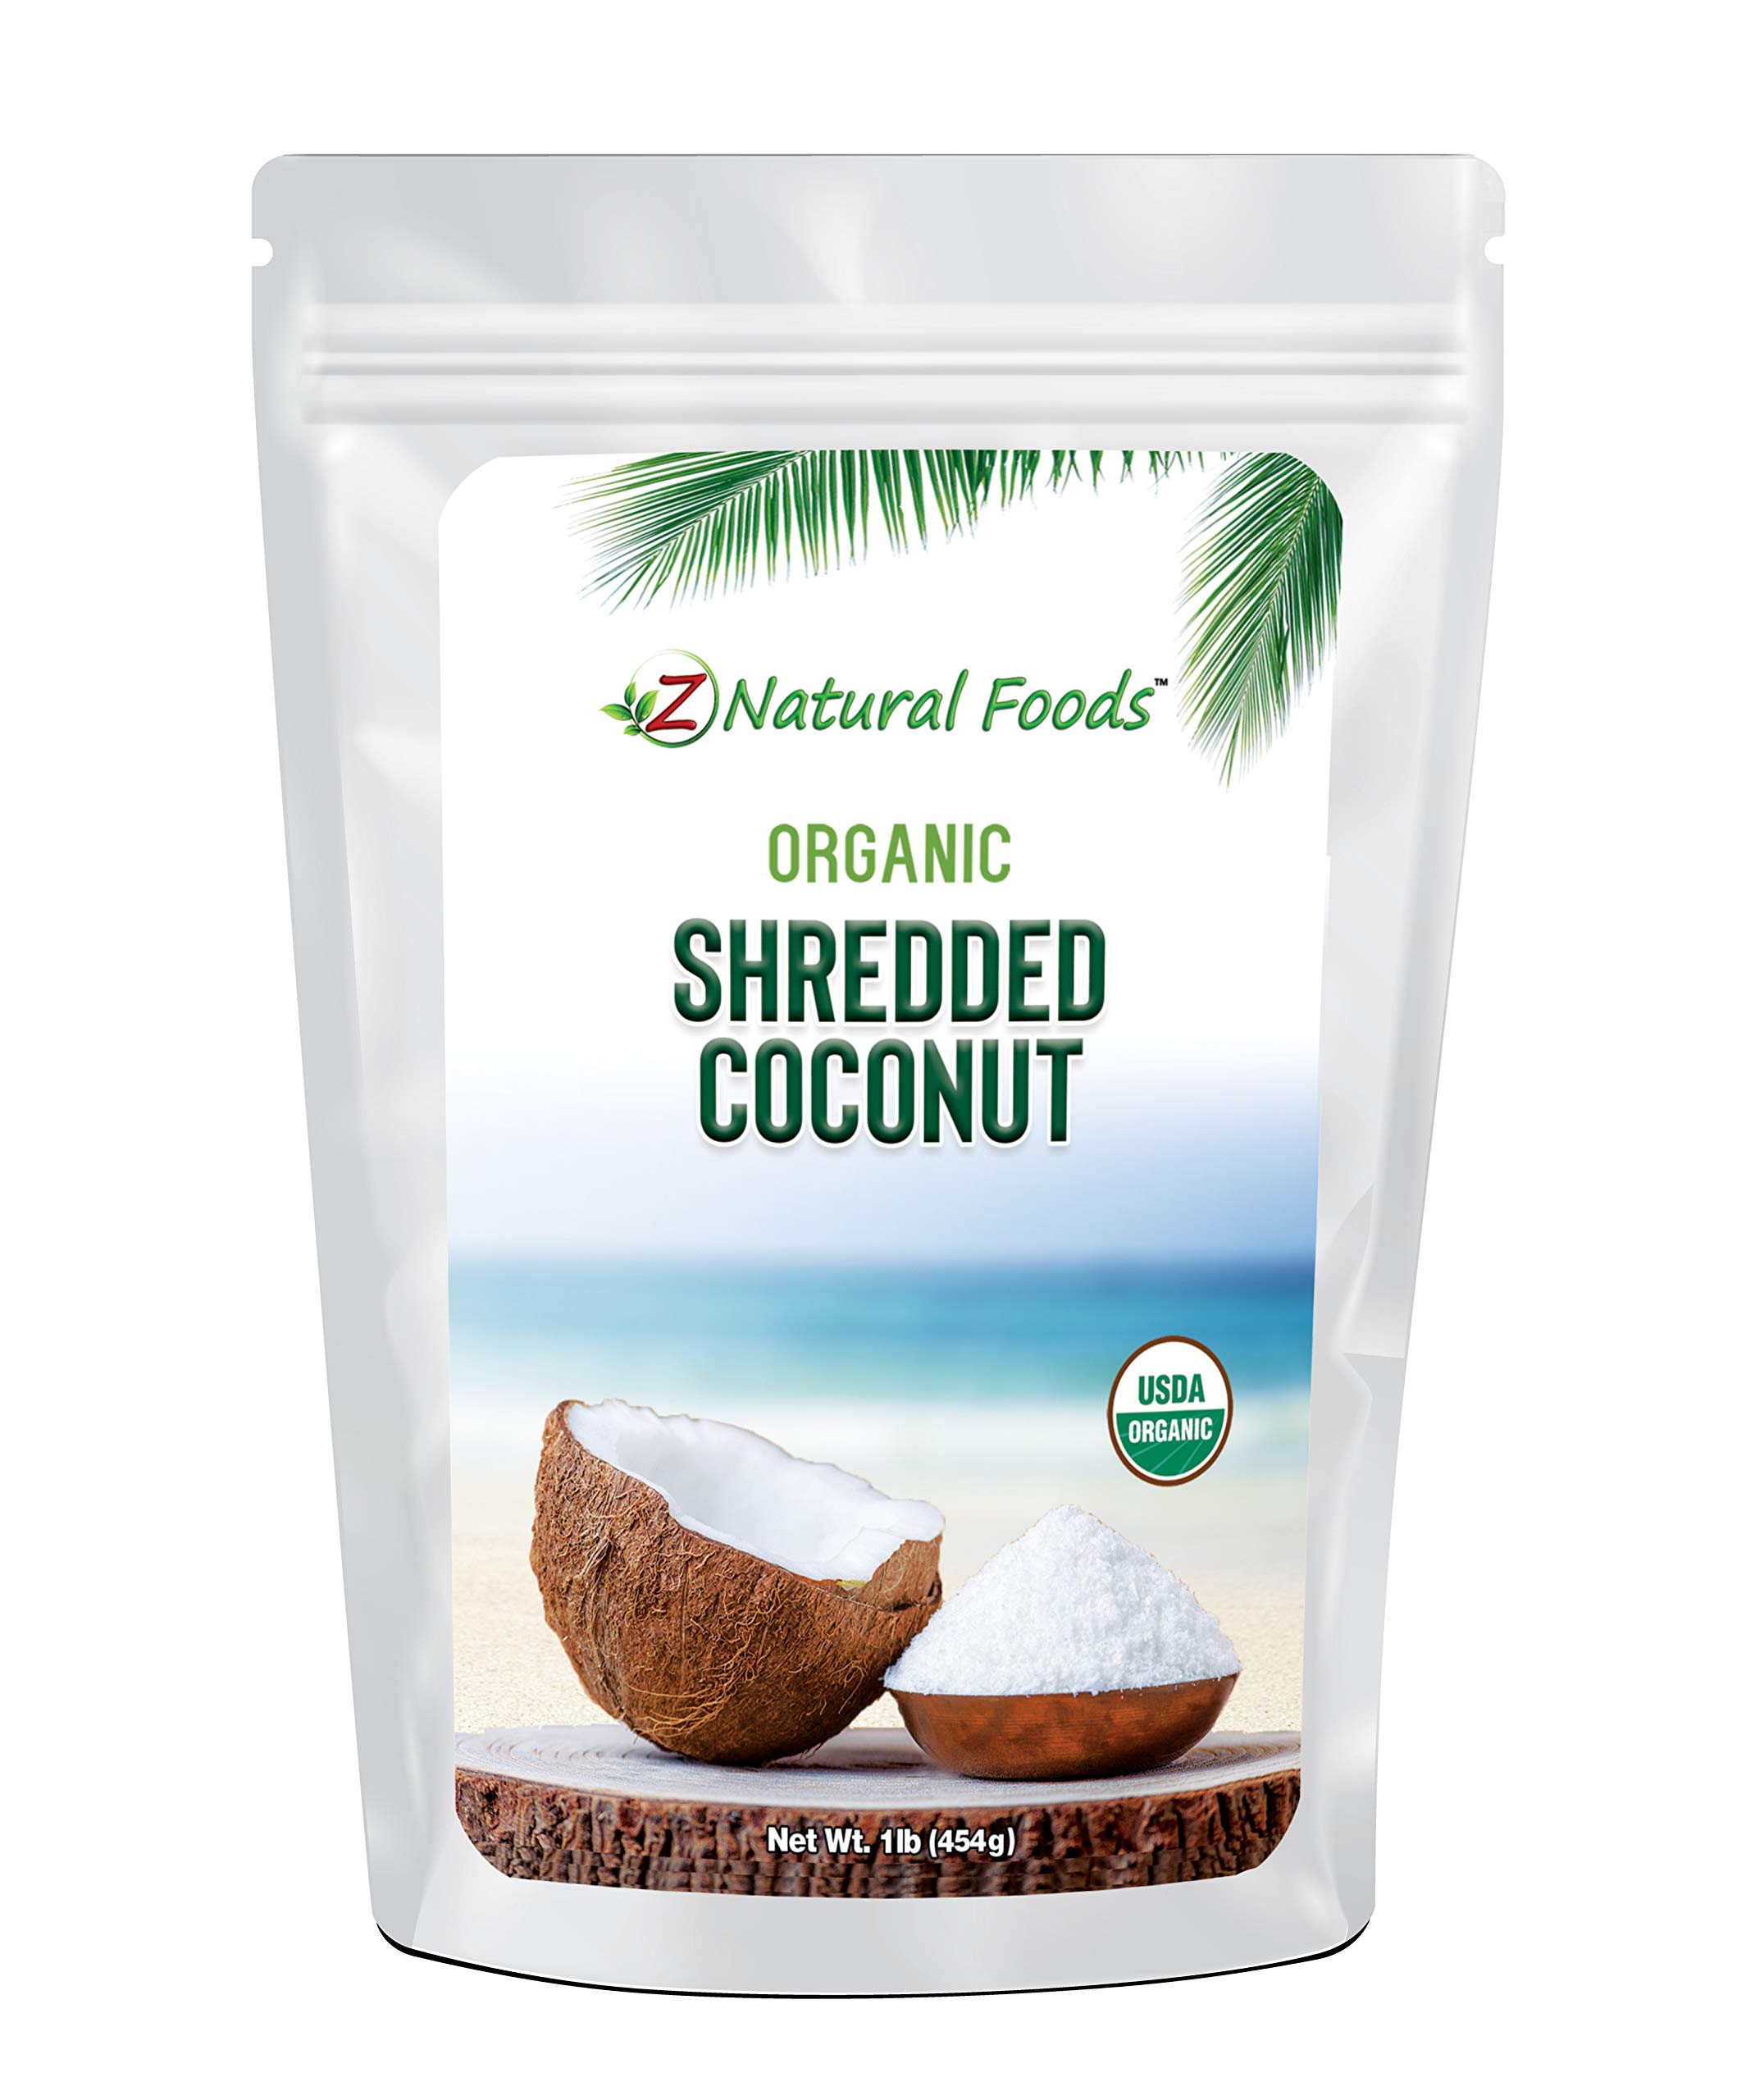 Organic Shredded Coconut - Unsweetened Macaroon Cut - Finely Cut Dried Flakes For Baking, Snacks, & Recipes - Raw, Vegan, Gluten Free, Non GMO - 1 lb